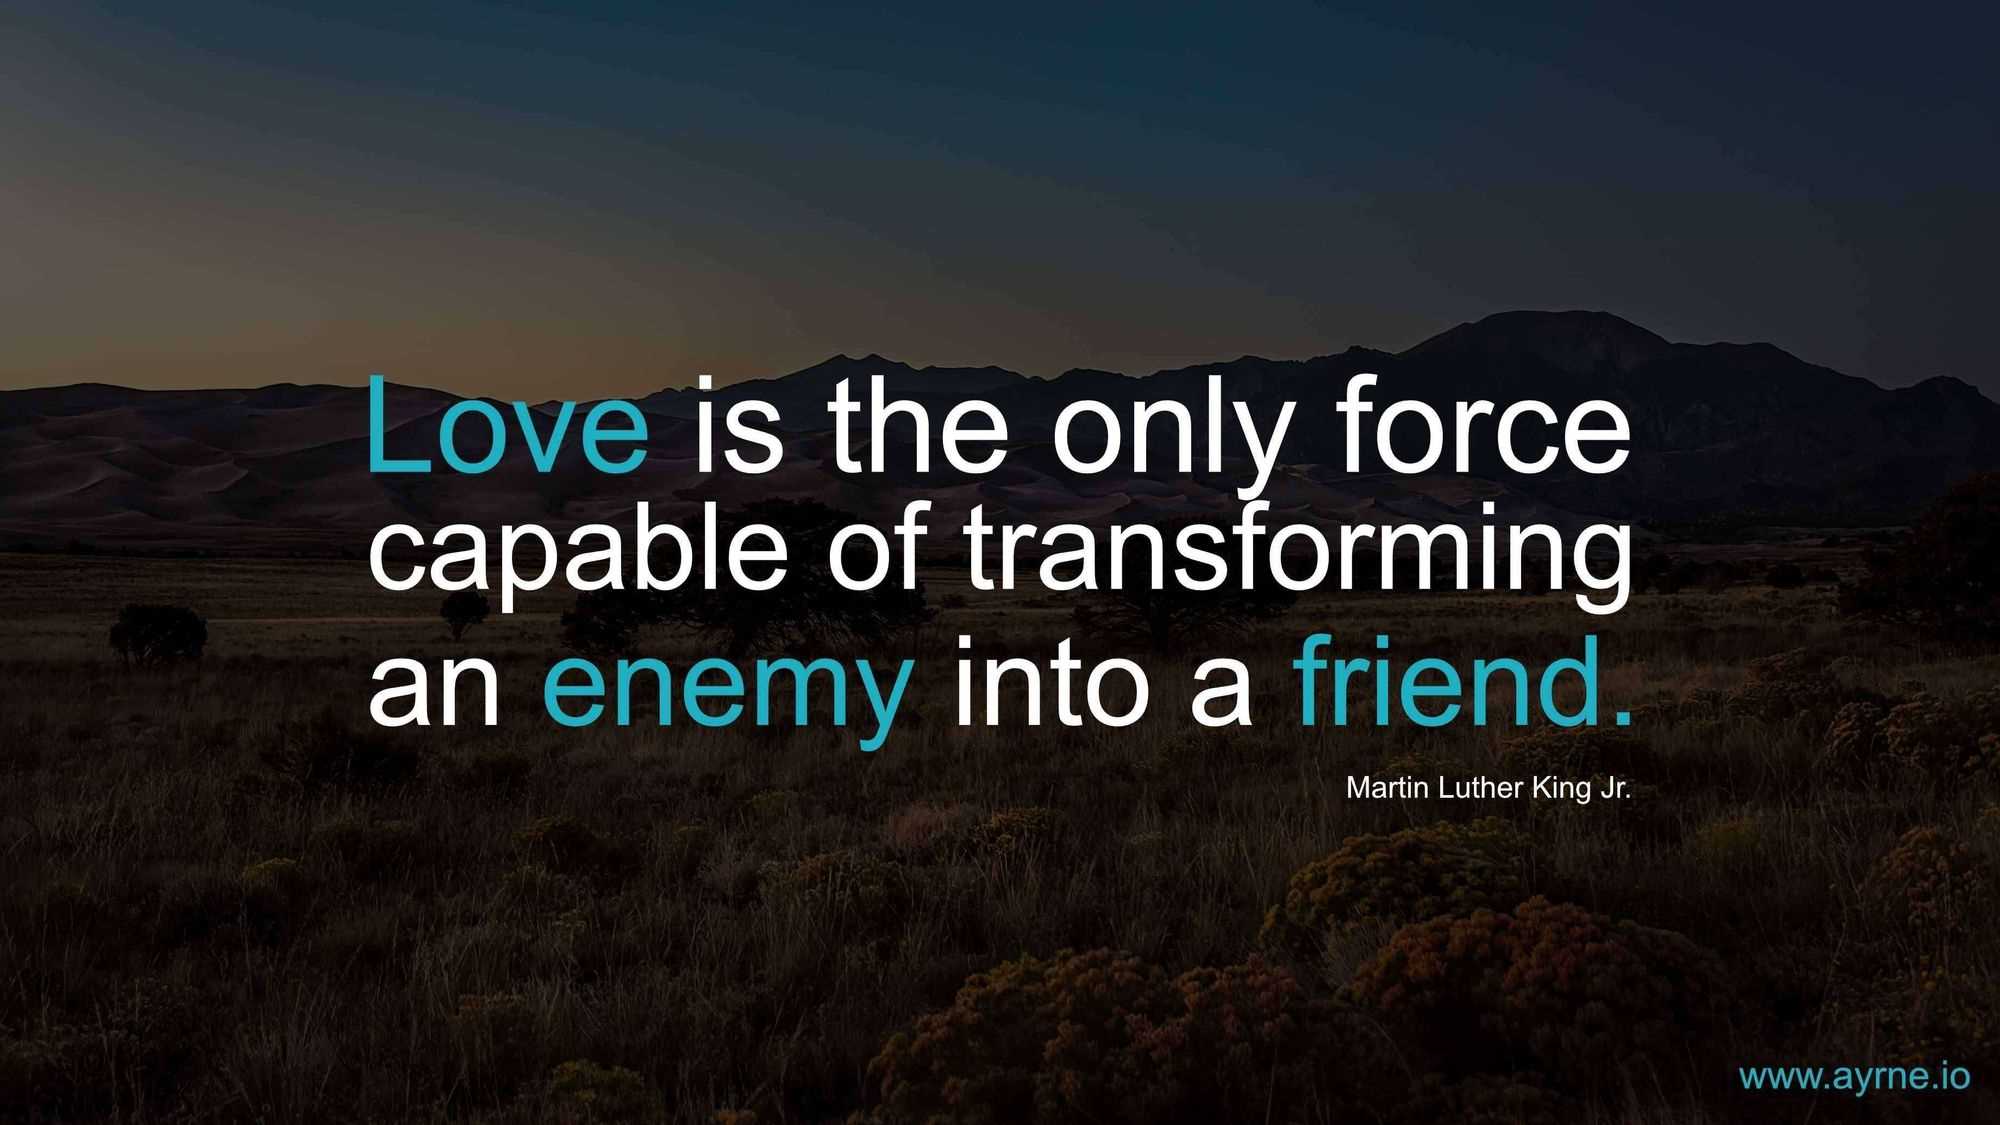 Love is the only force capable of transforming an enemy into a friend.